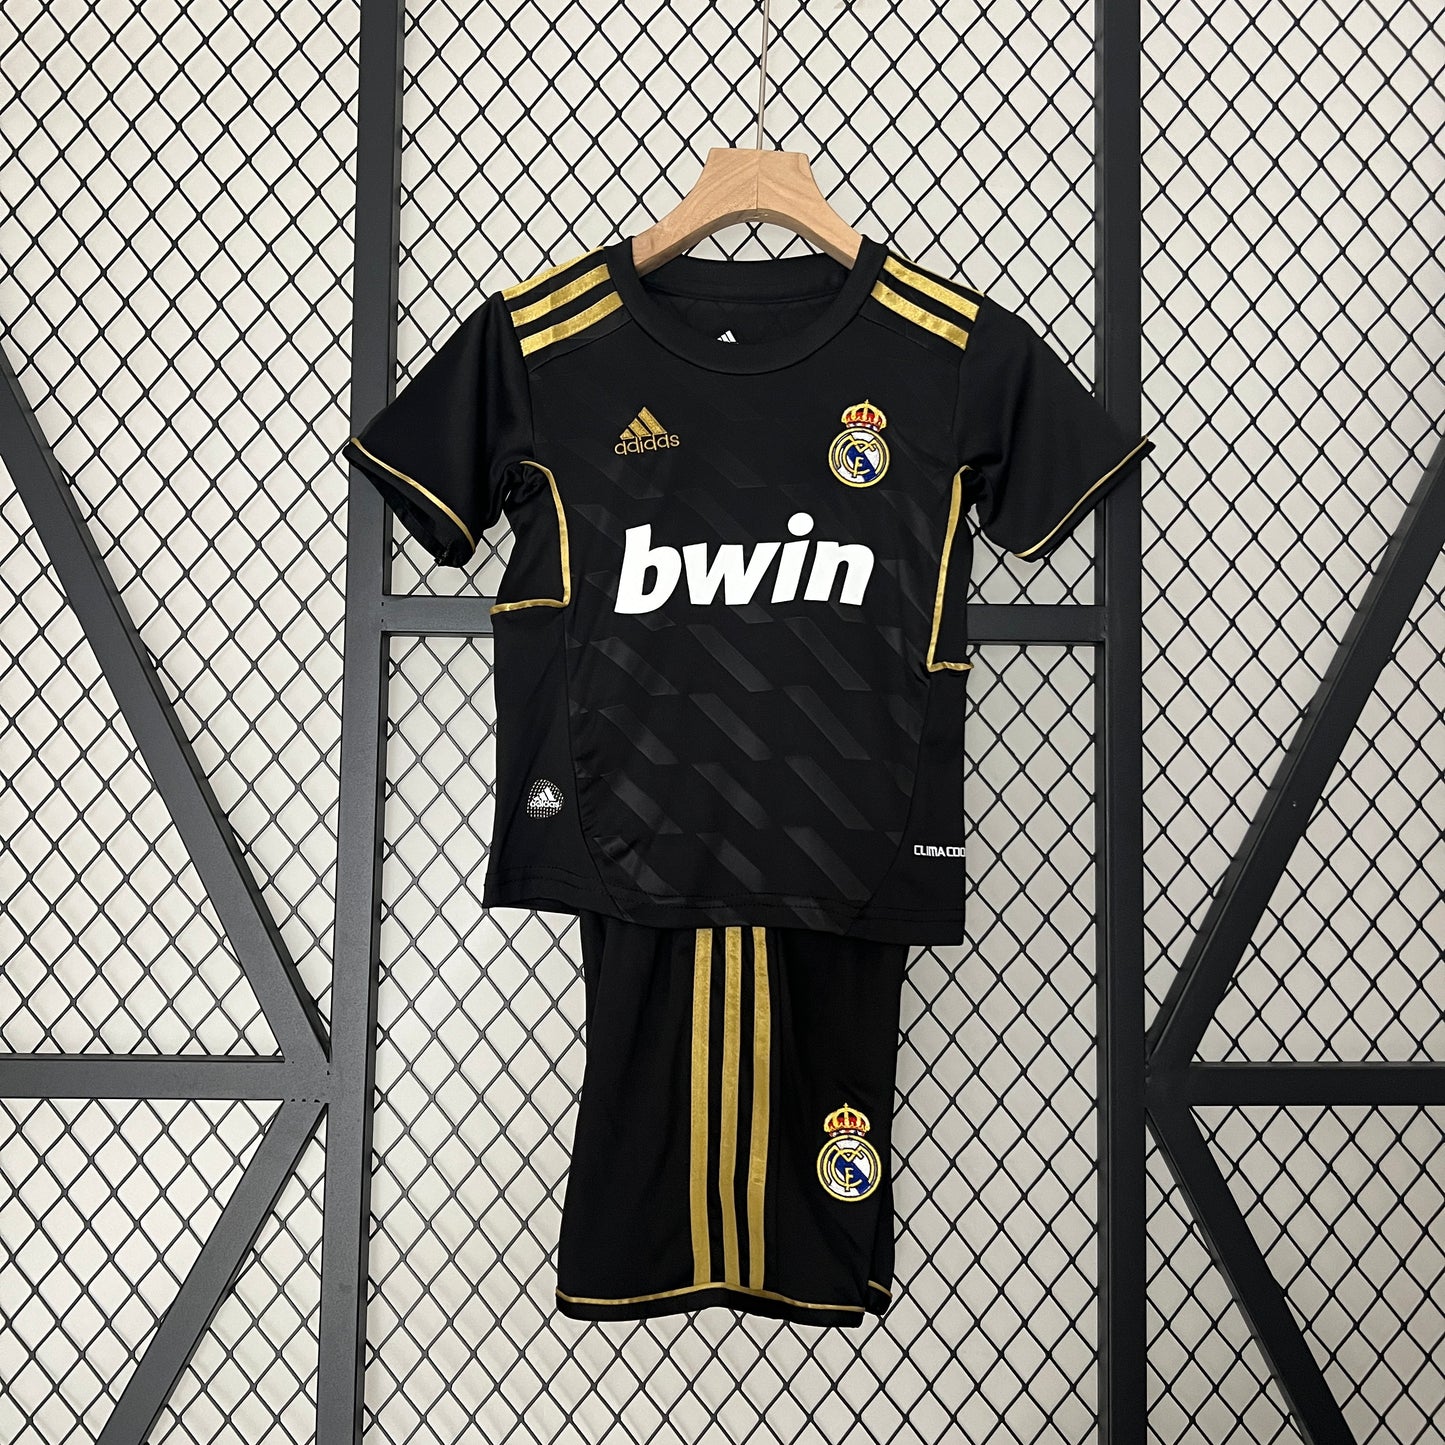 REAL MADRID 2011 - 2012 AWAY JERSEY FOR CHILDREN